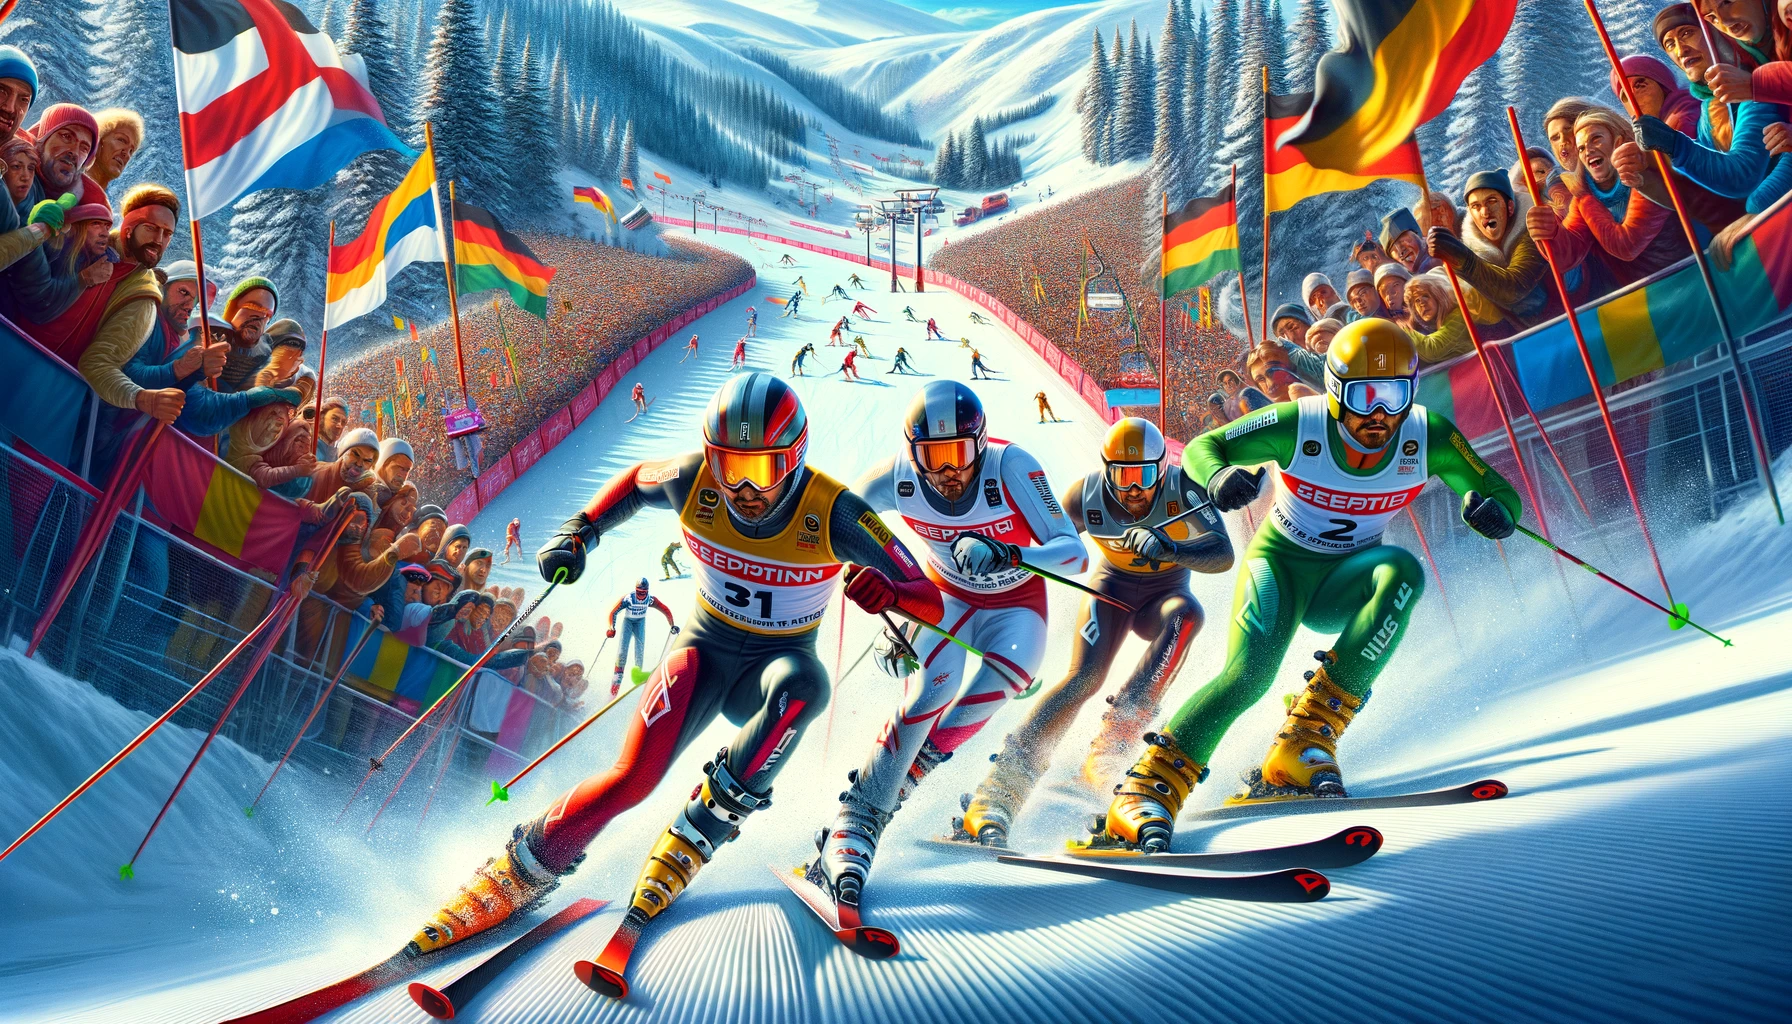 Ski Race - Which Ski & Outdoor Manufacturer is the most aktive company in engineering ?